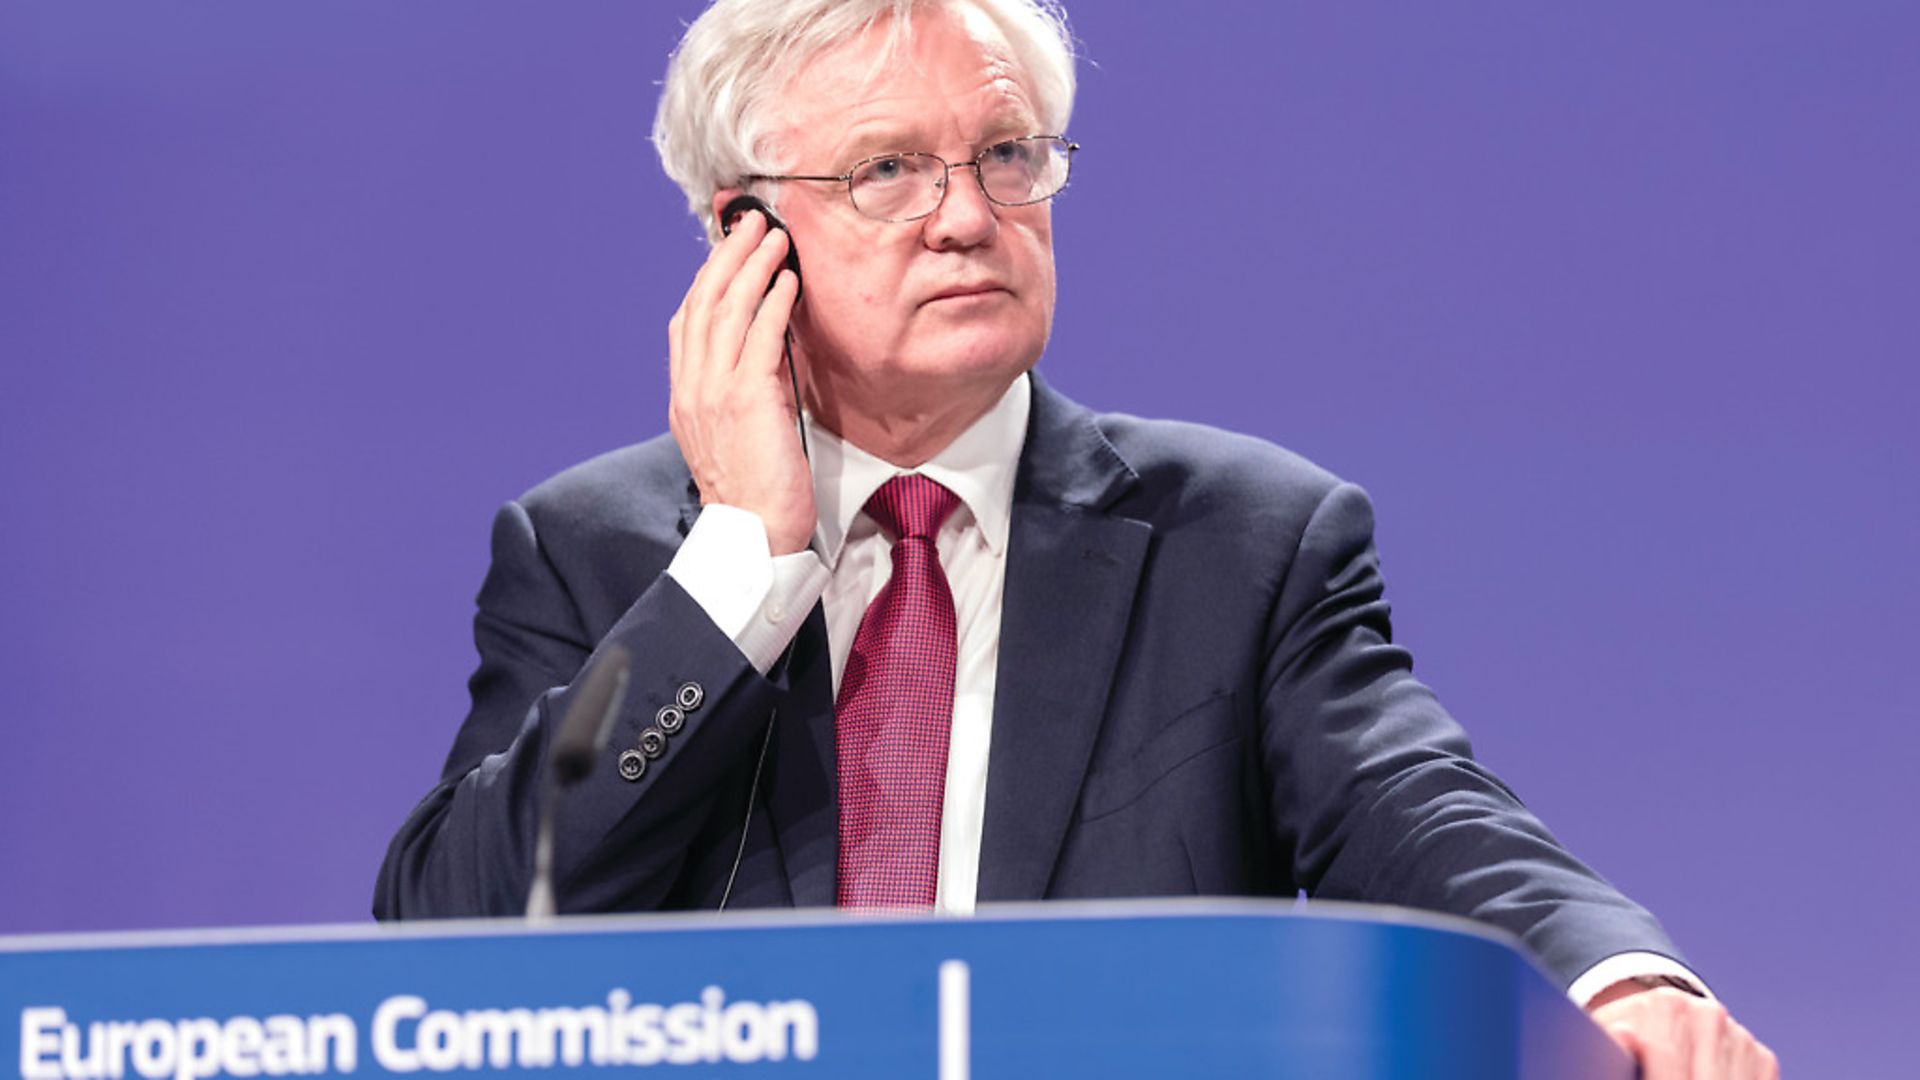 British Secretary of State for Exiting the European Union David Davis - Credit: ABACA/PA Images